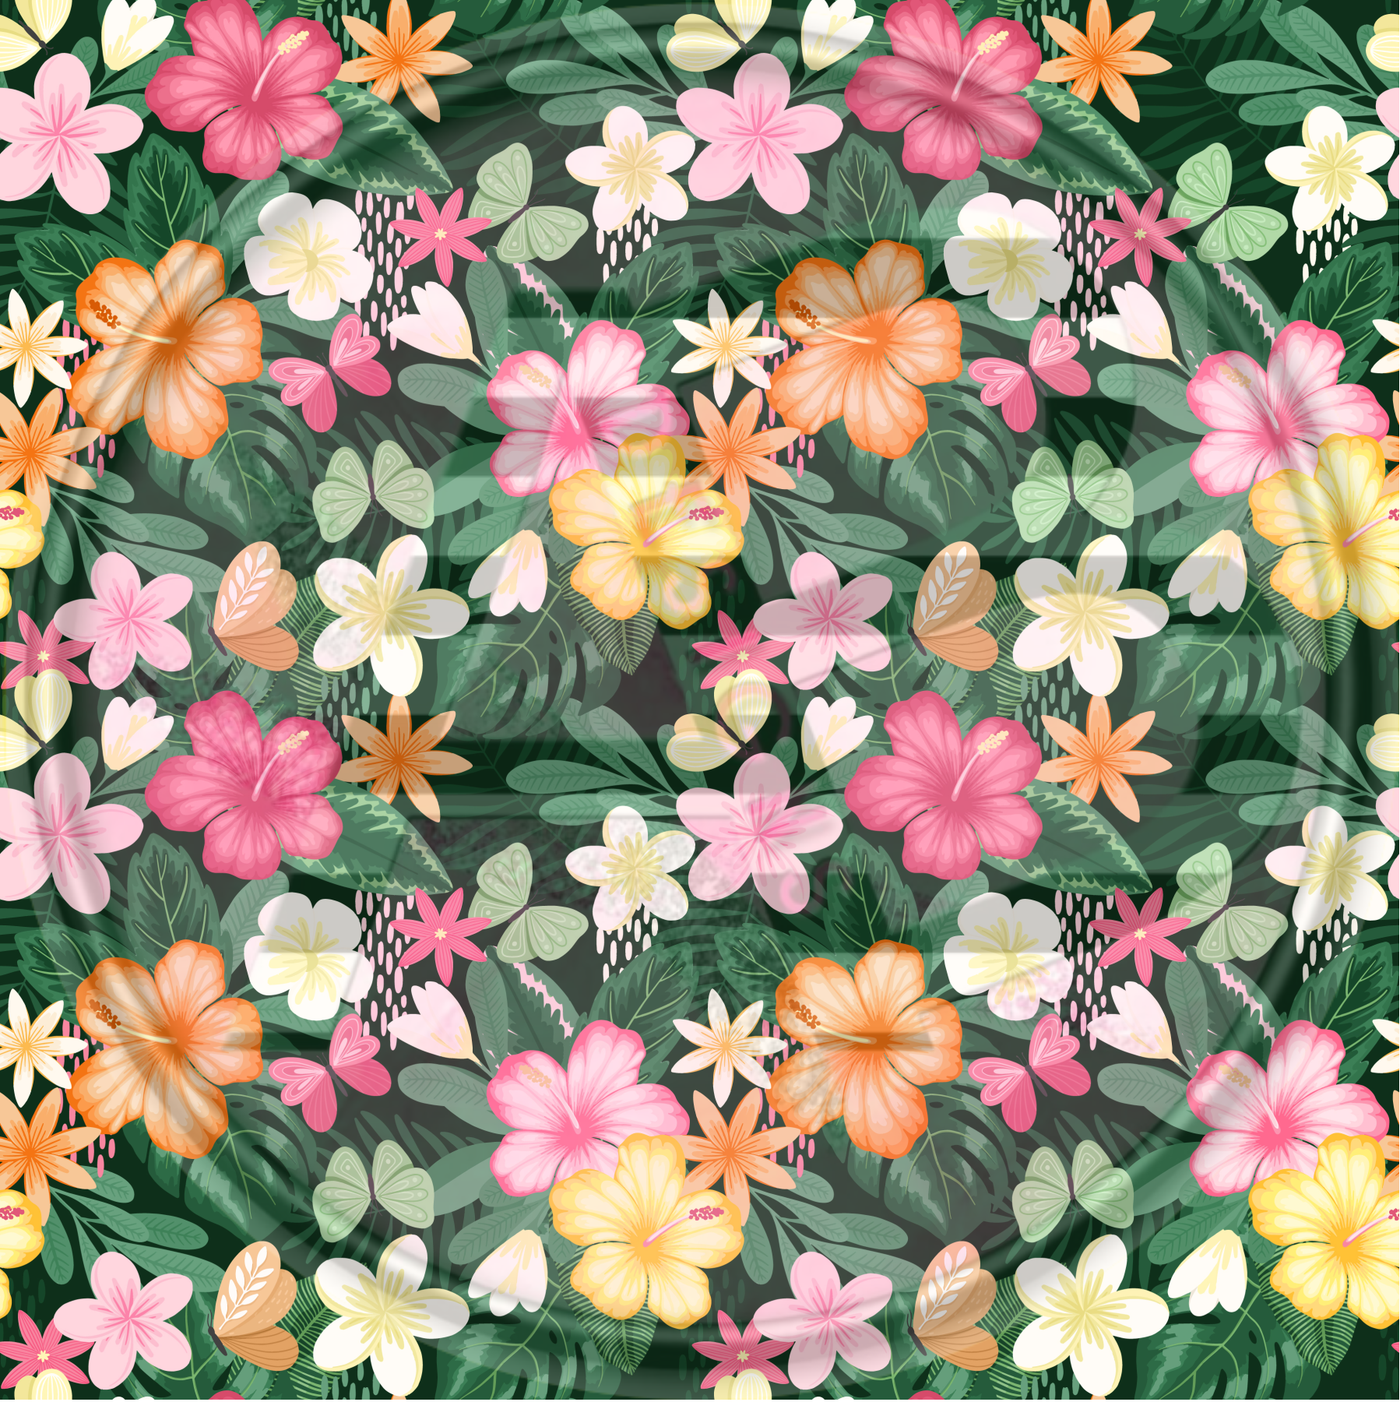 Adhesive Patterned Vinyl - Tropical Exotic Floral 37